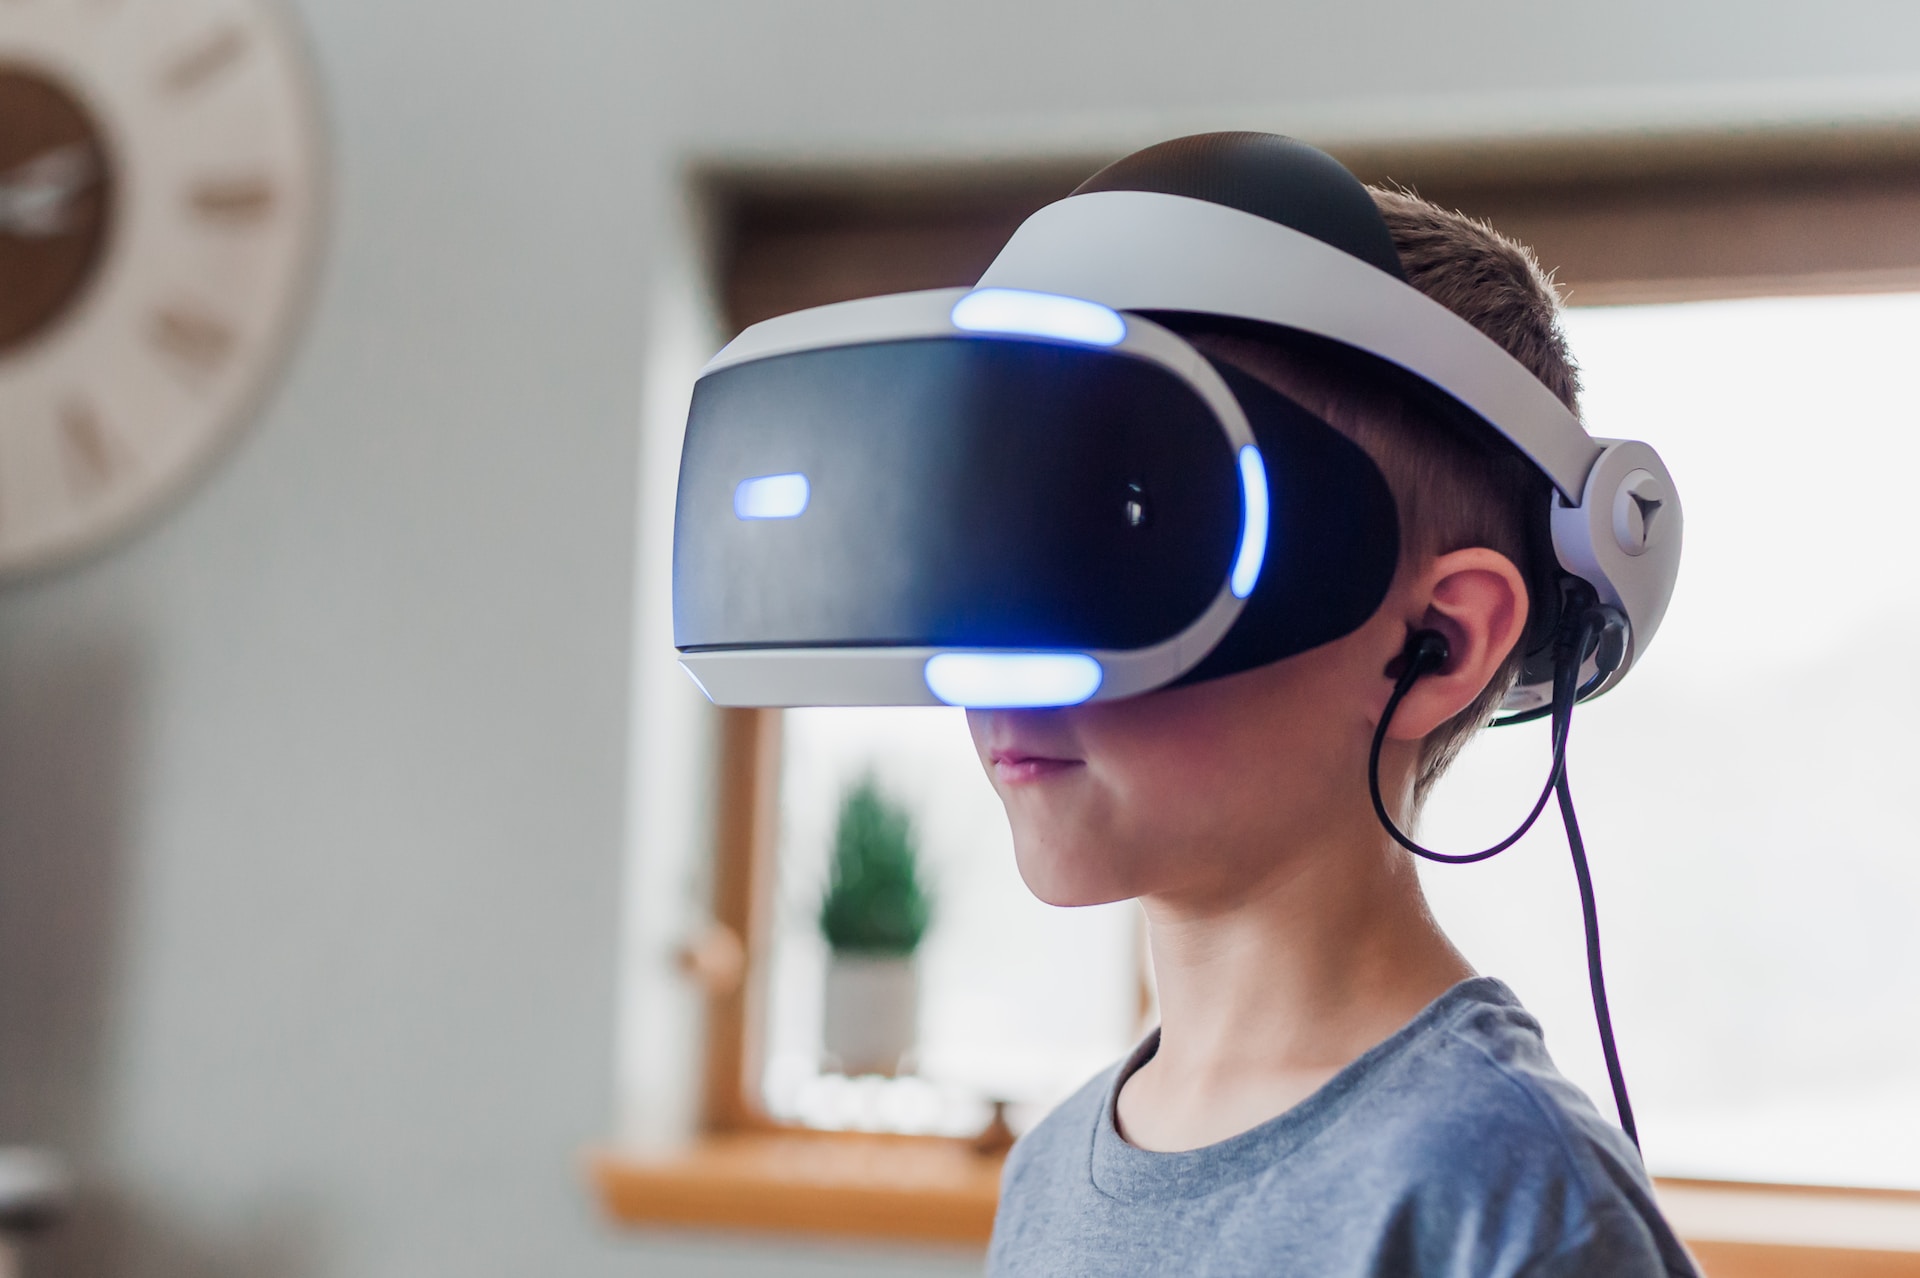 A male kid in T-shirt and wearing a virtual reality headset for a VR gameplay